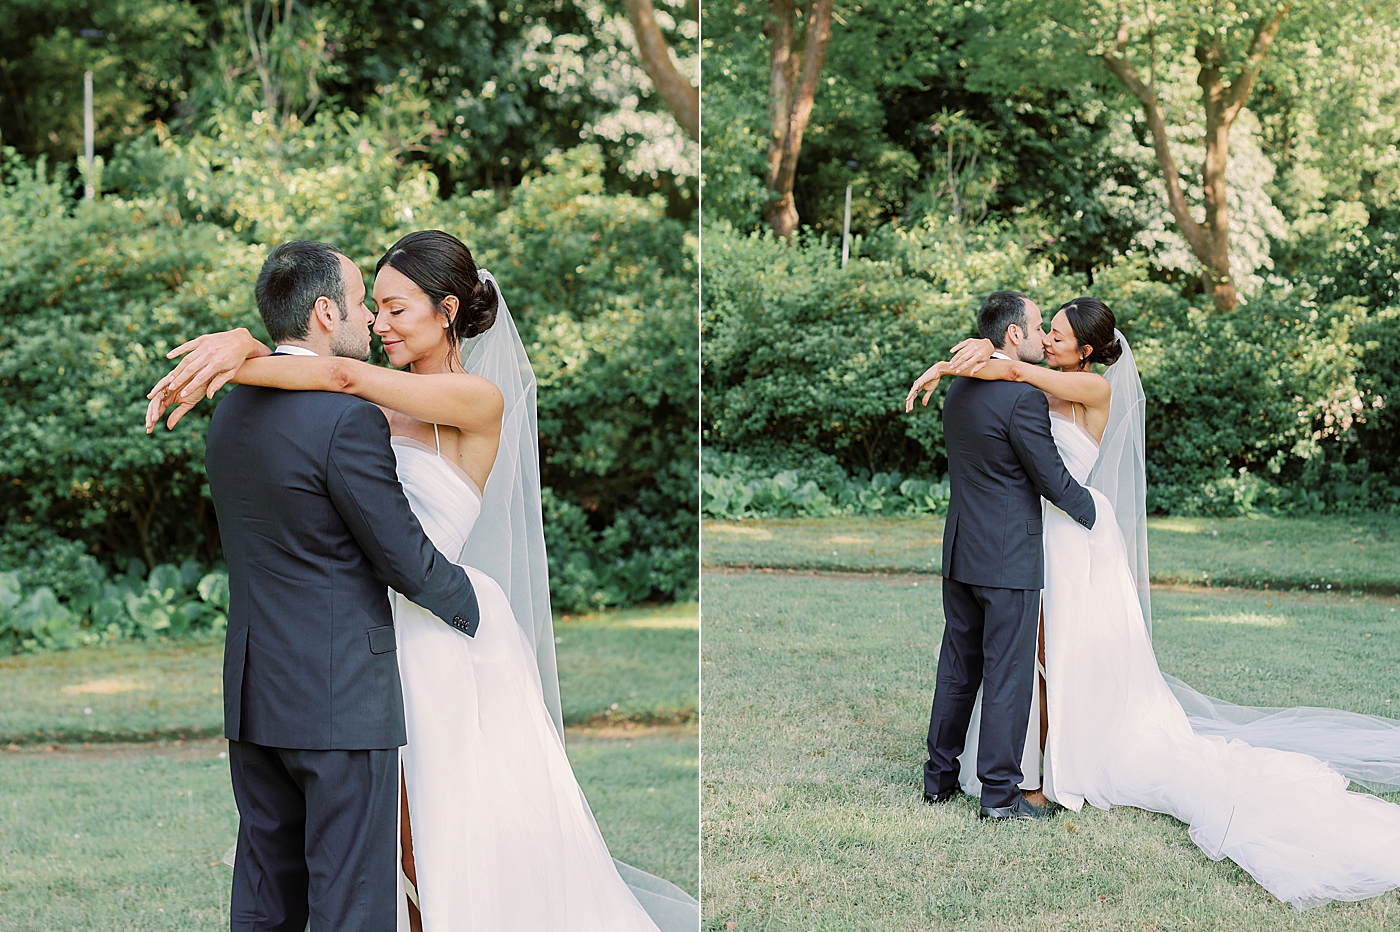 Bride and groom kissing | Image by Diane Sotero Photography